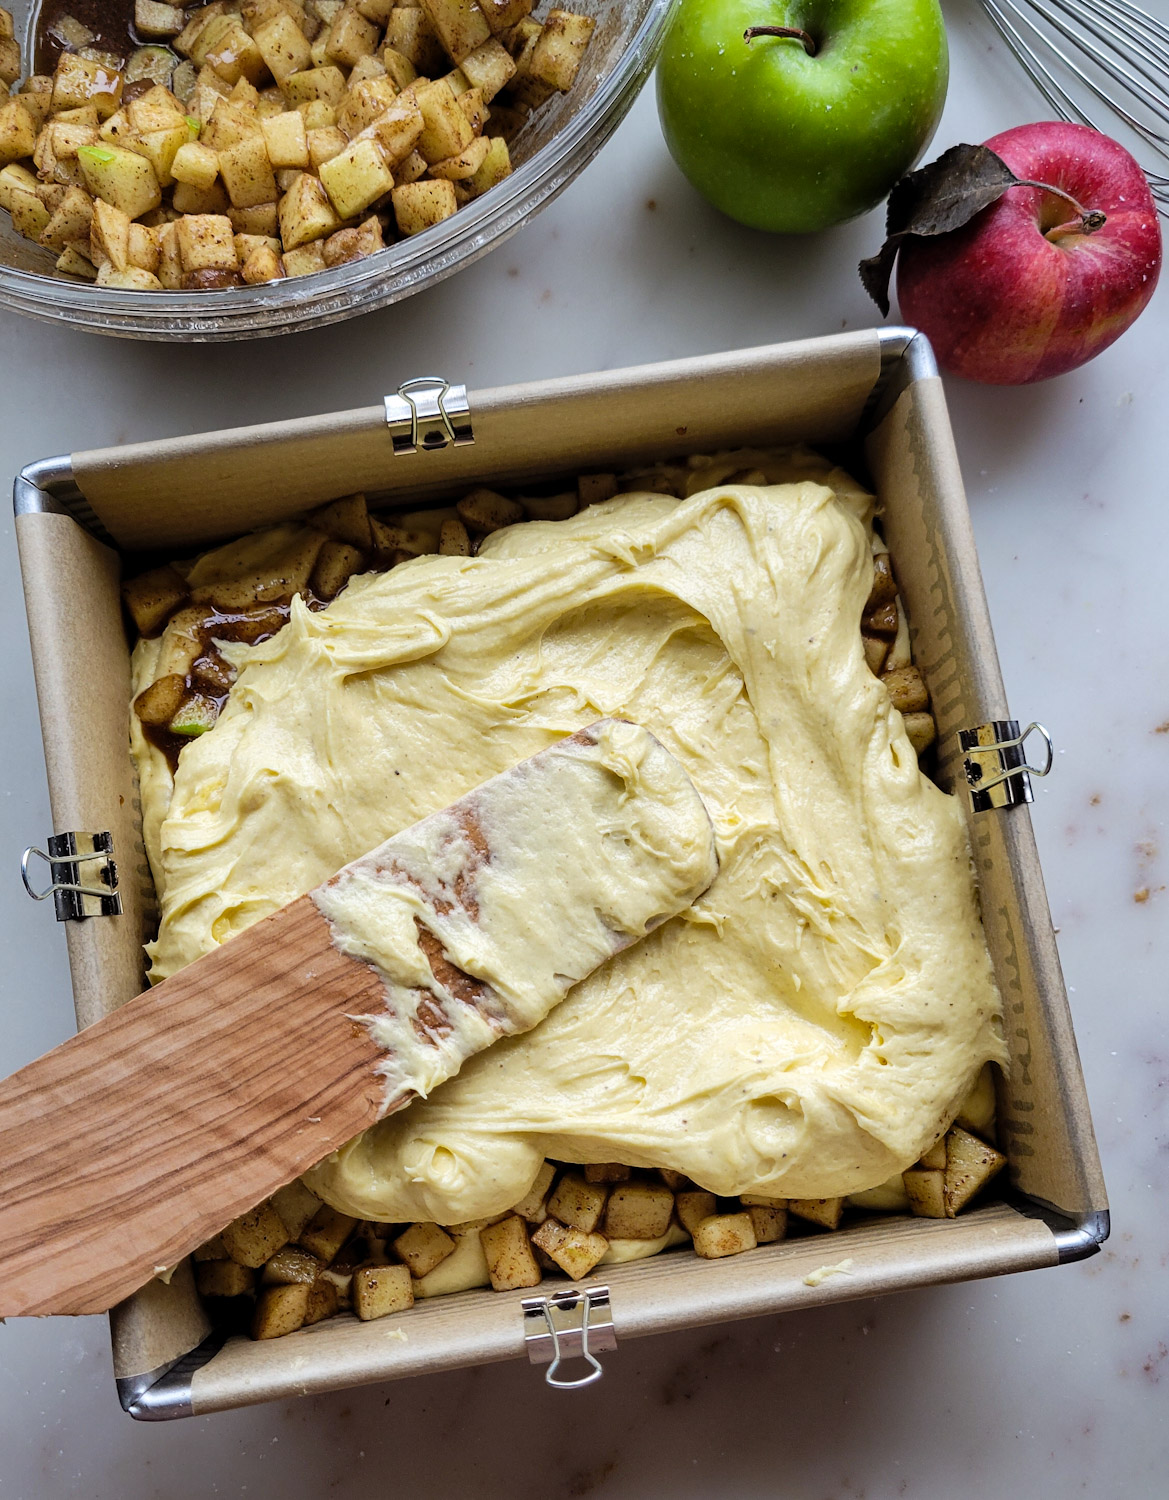 A baking pan with layers of cake batter and diced spiced apples. A bowl of diced spiced apples is to the side, as well as two fresh apples.